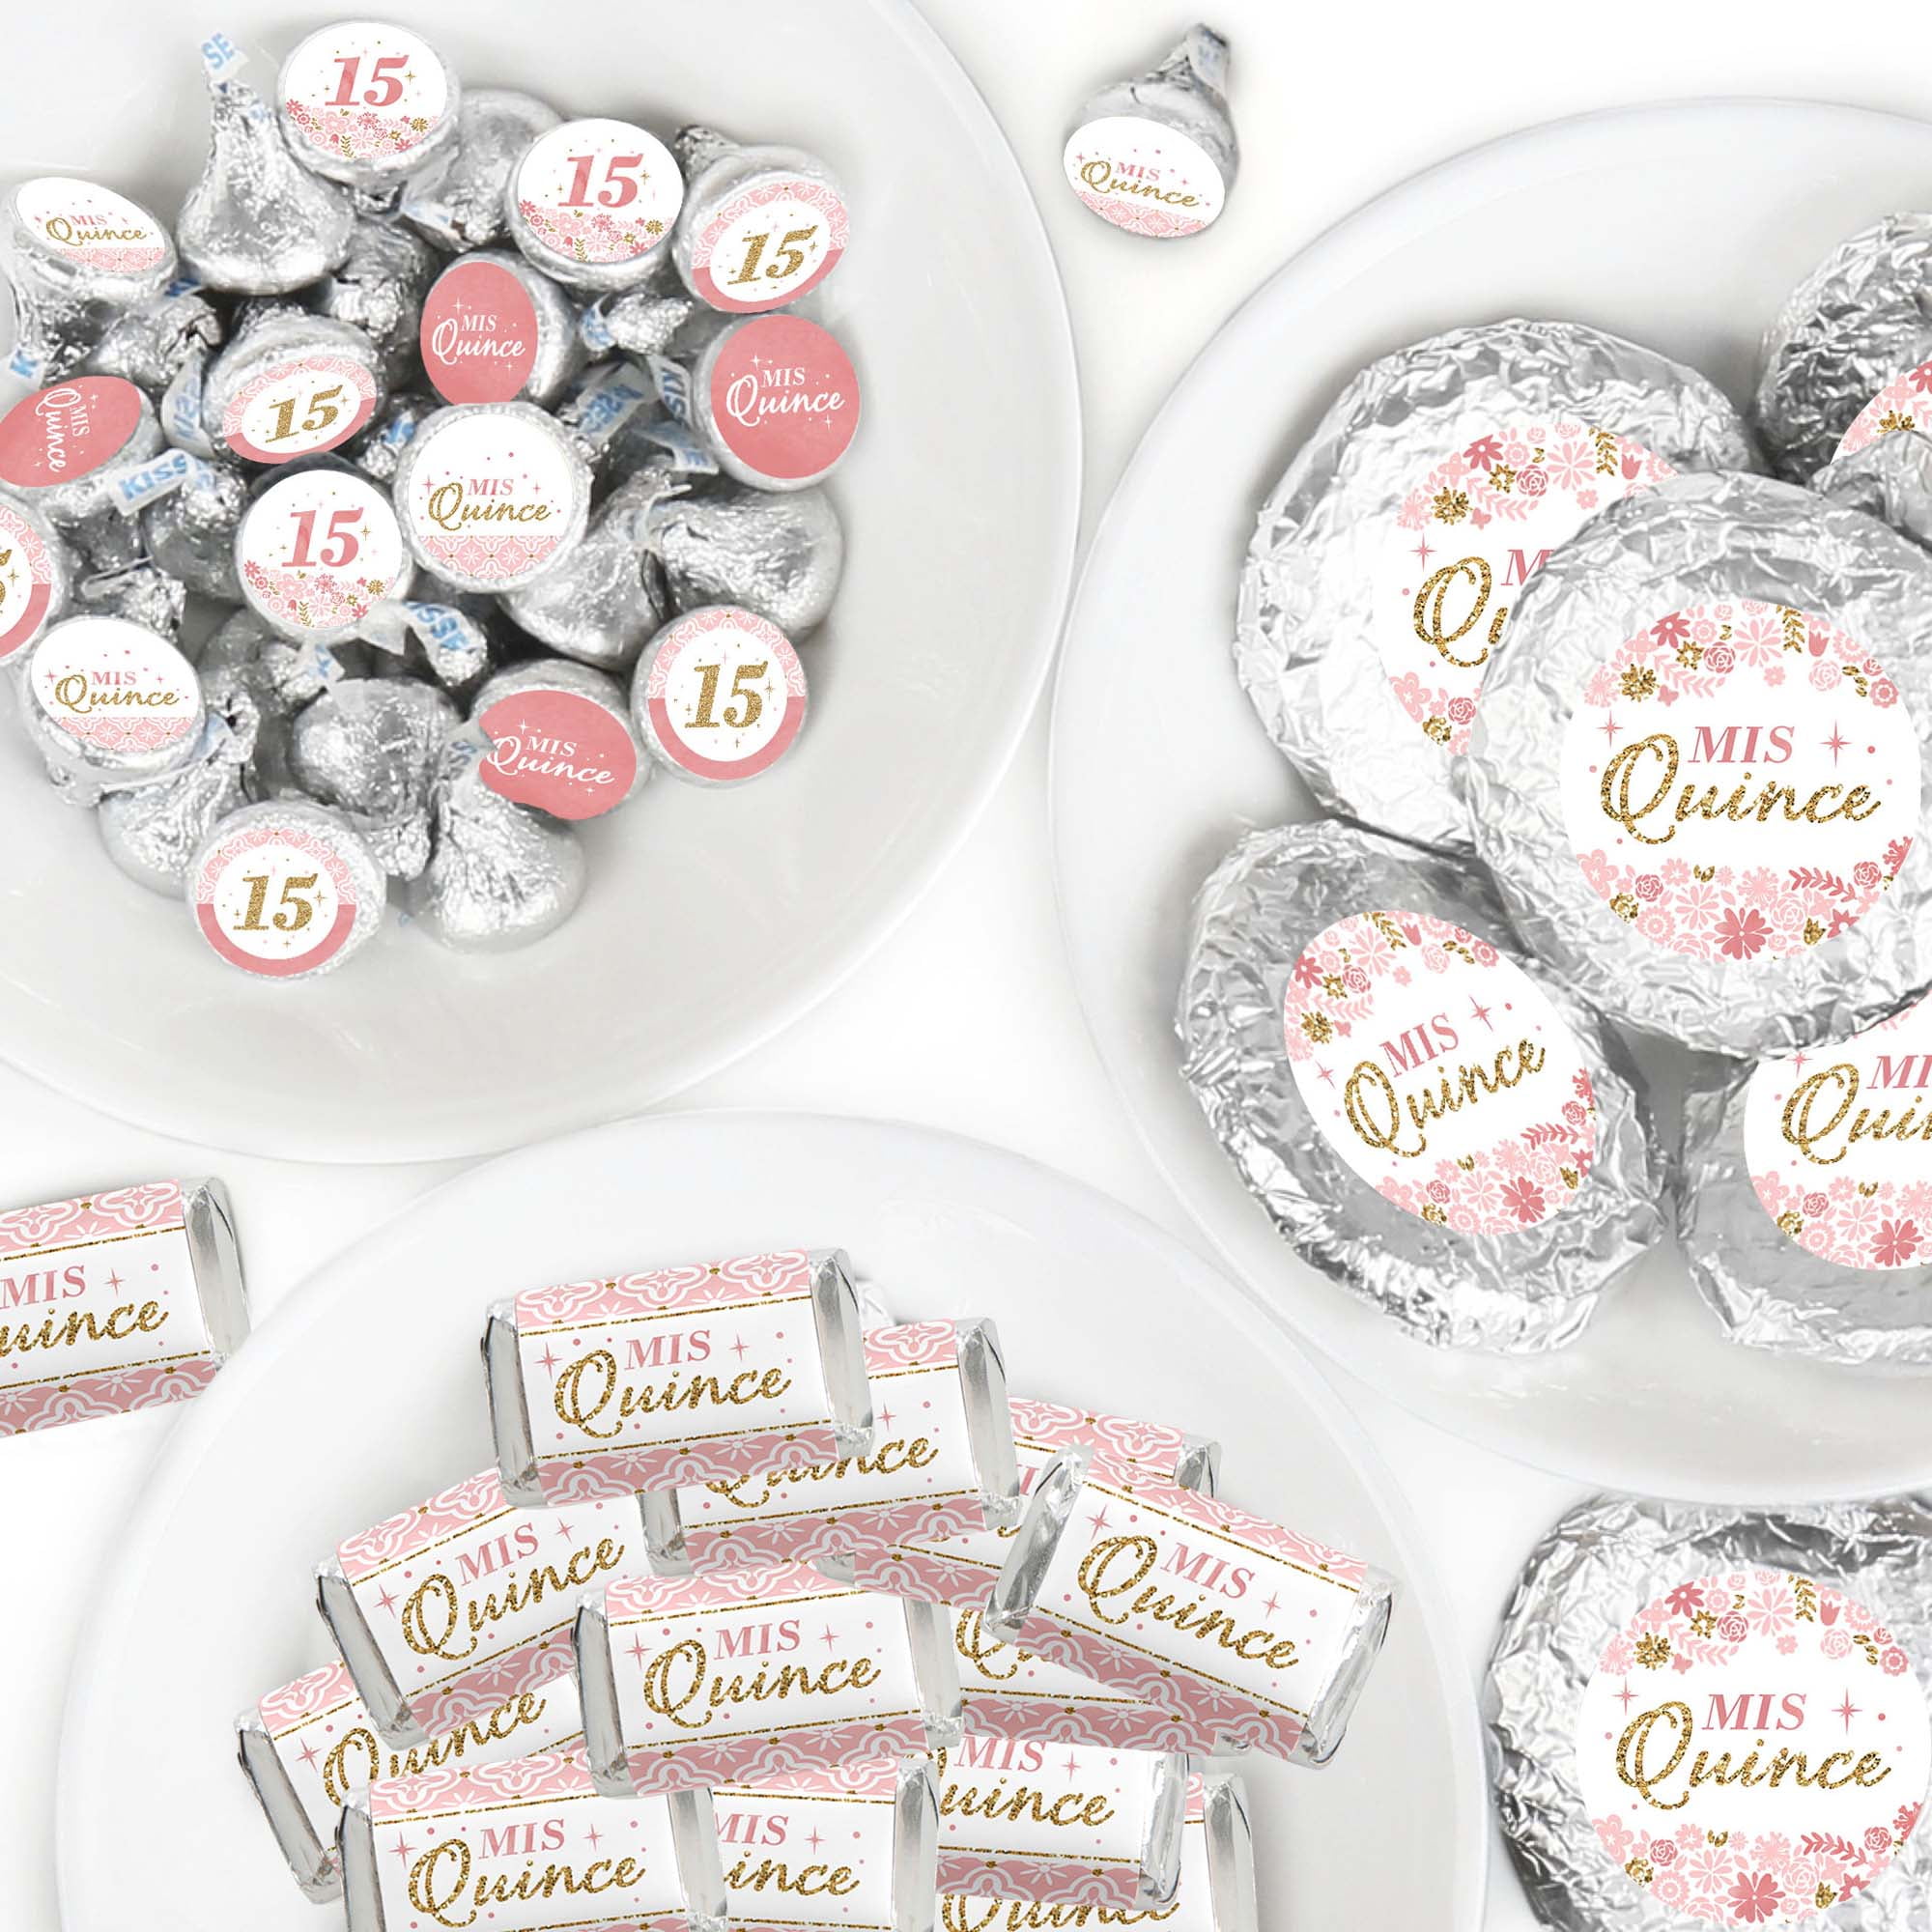 180 HIGH GLOSS MONOGRAM WEDDING Candy wrappers/labels FAVOR 4 HERSHEY MINIATURES 